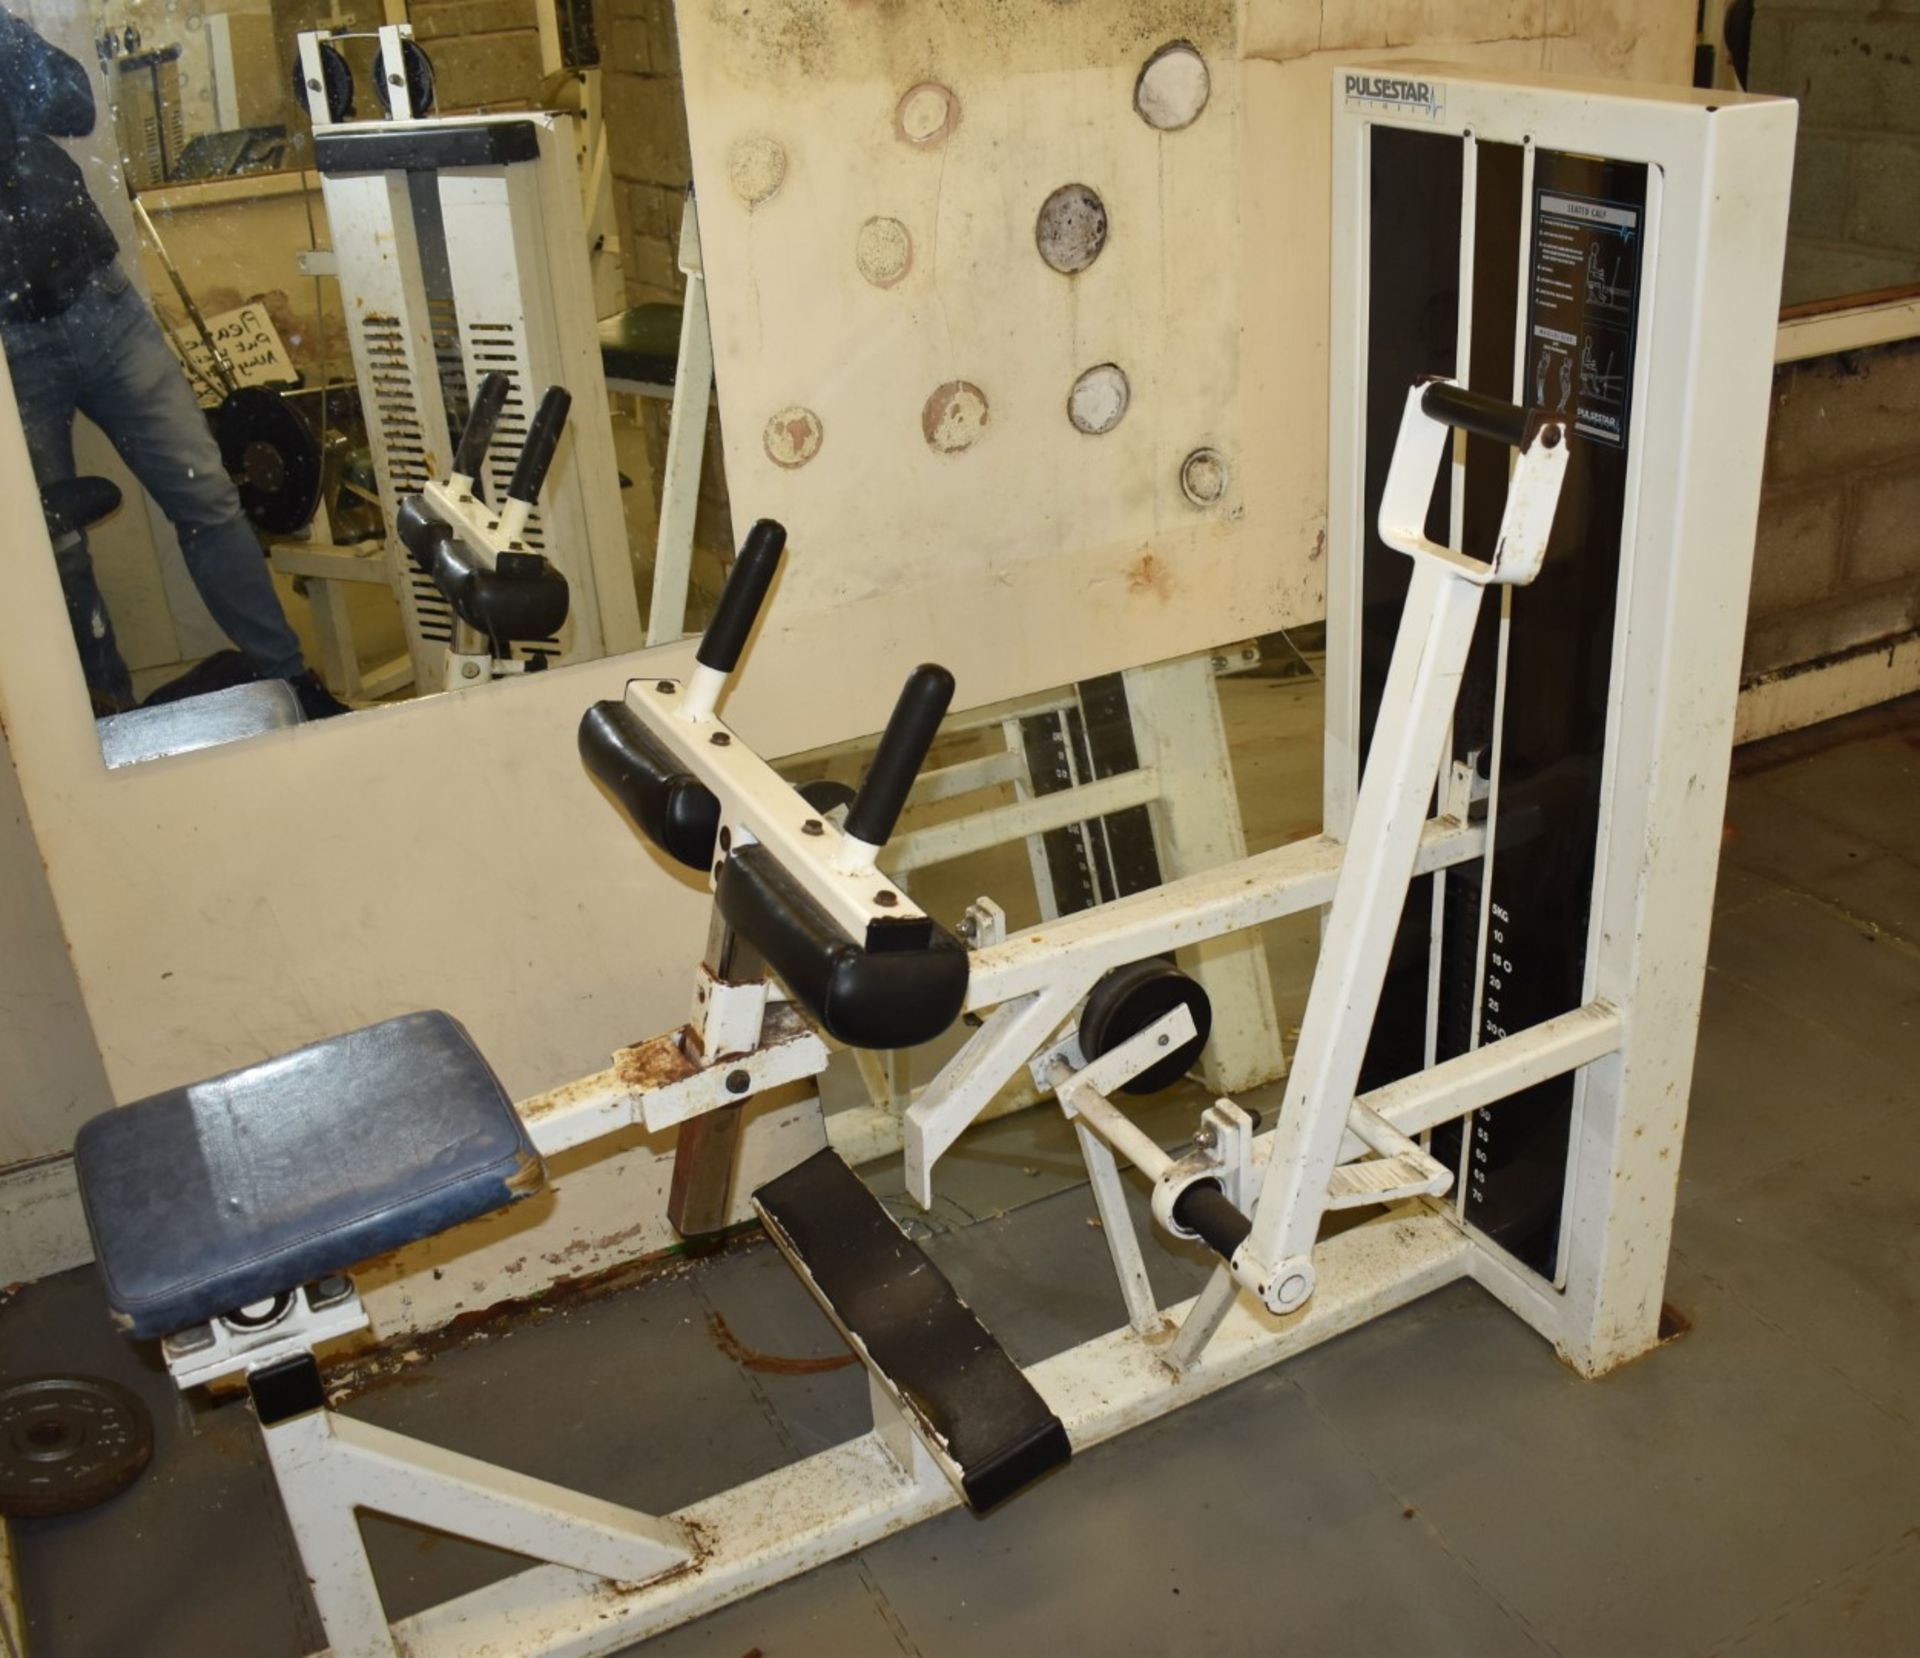 Contents of Bodybuilding and Strongman Gym - Includes Approx 30 Pieces of Gym Equipment, Floor Mats, - Image 39 of 95